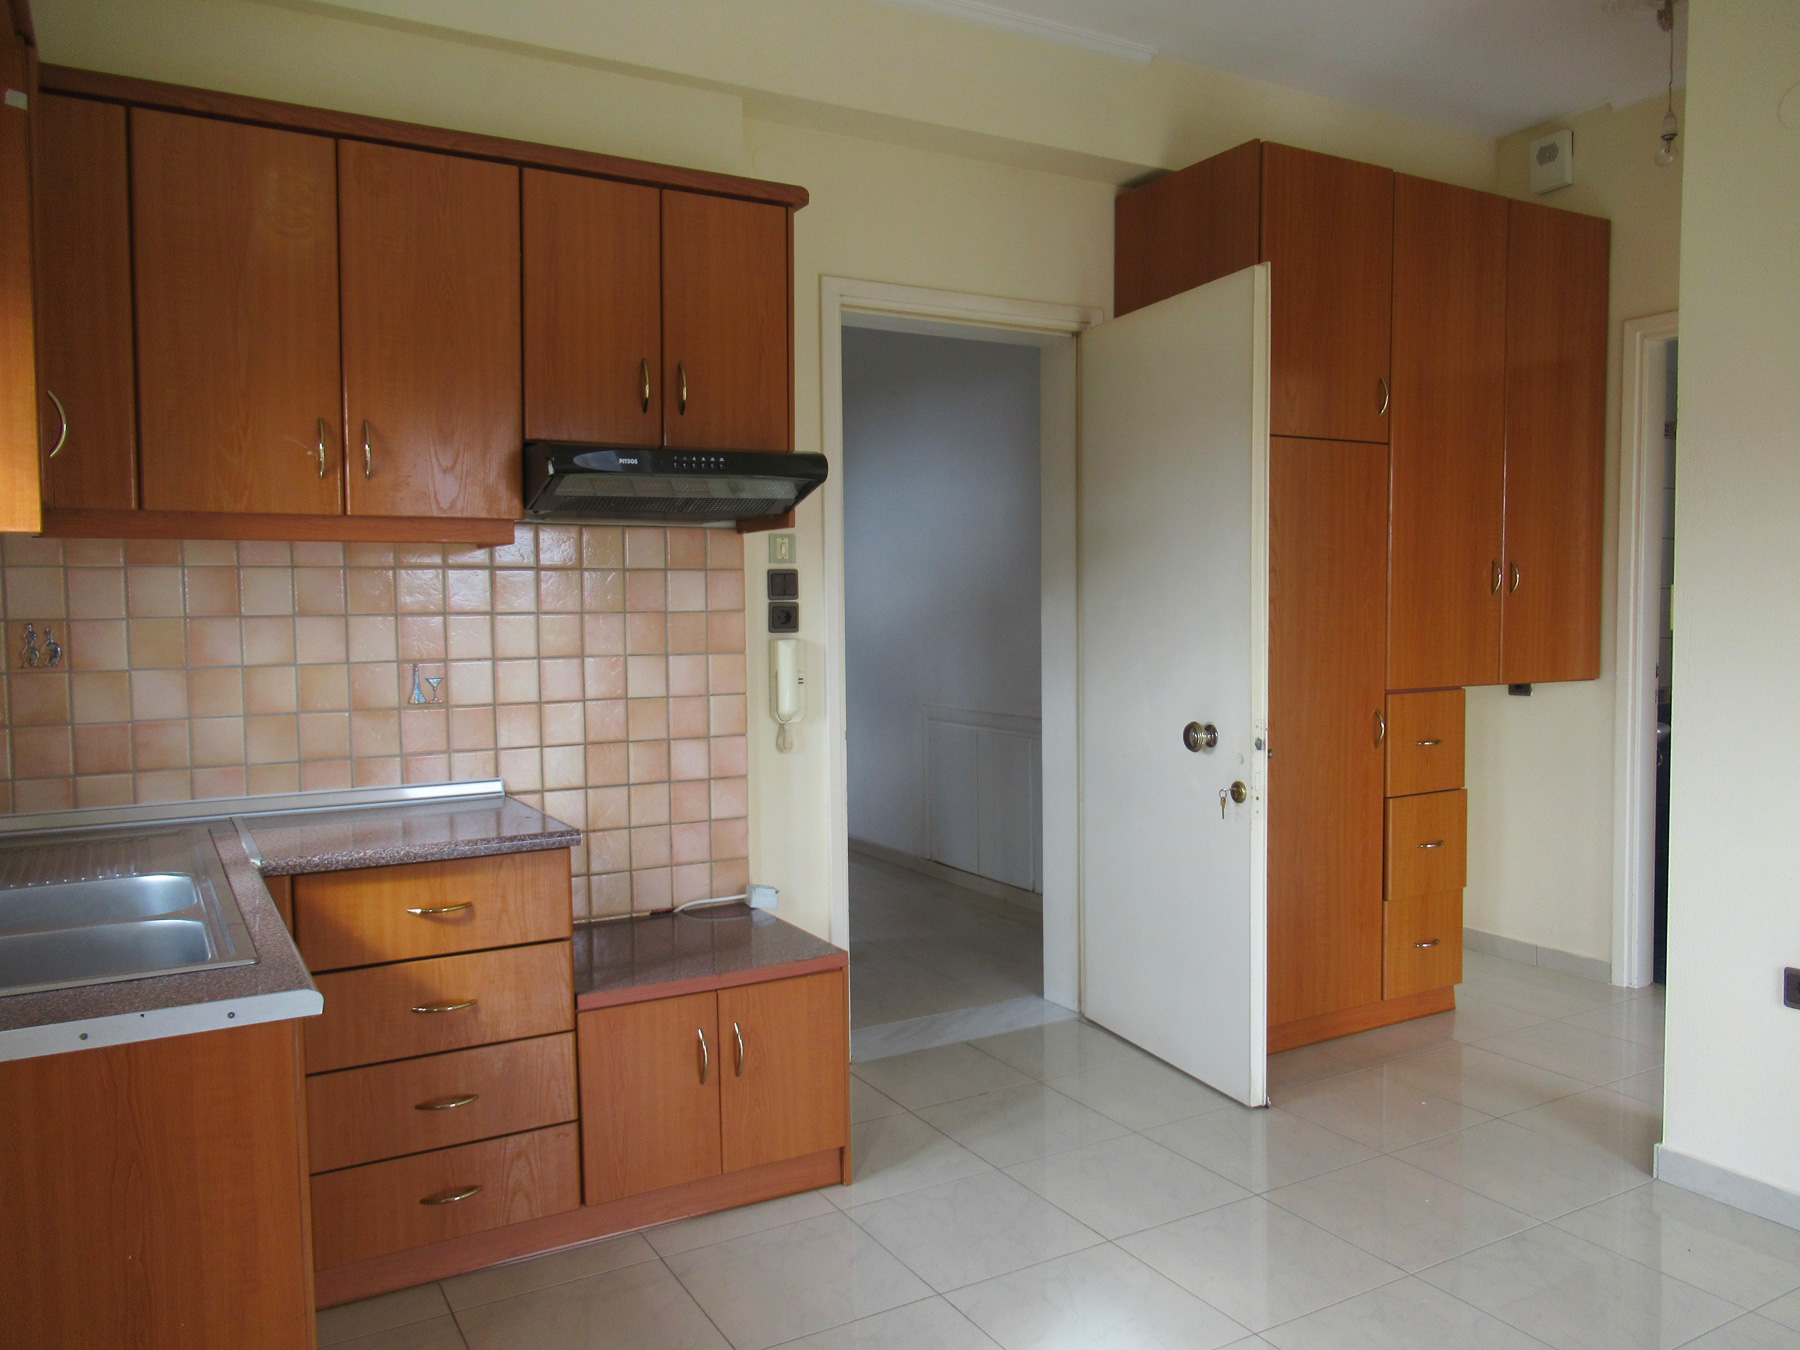 For rent sunny 1 bedroom studio of 38 sq.m. on the 2nd floor in the center of Ioannina